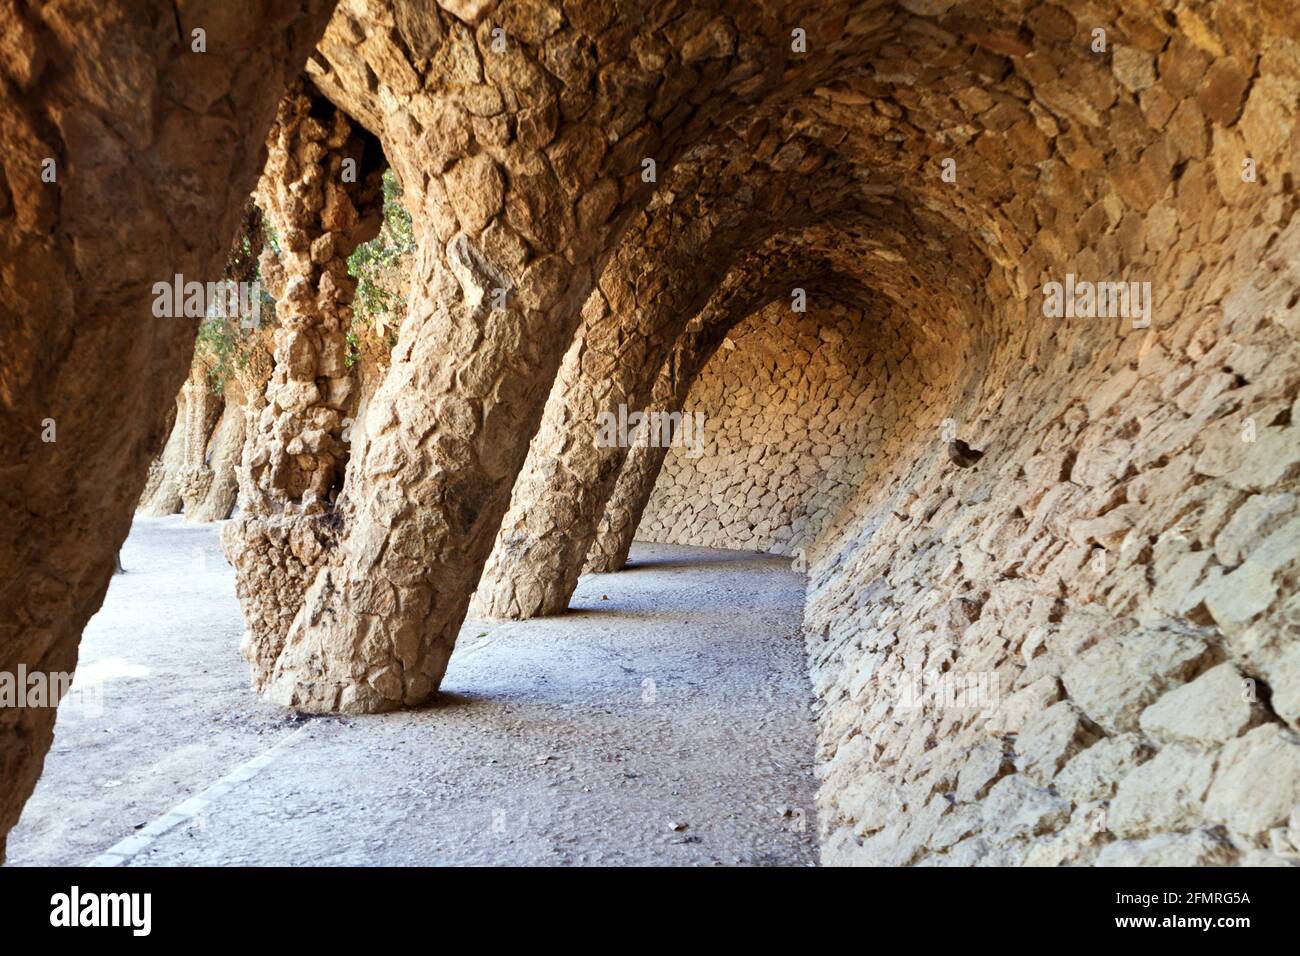 Antoni Gaudi hause and ceramic bench in Park Guell, Barcelona, Spain Stock Photo